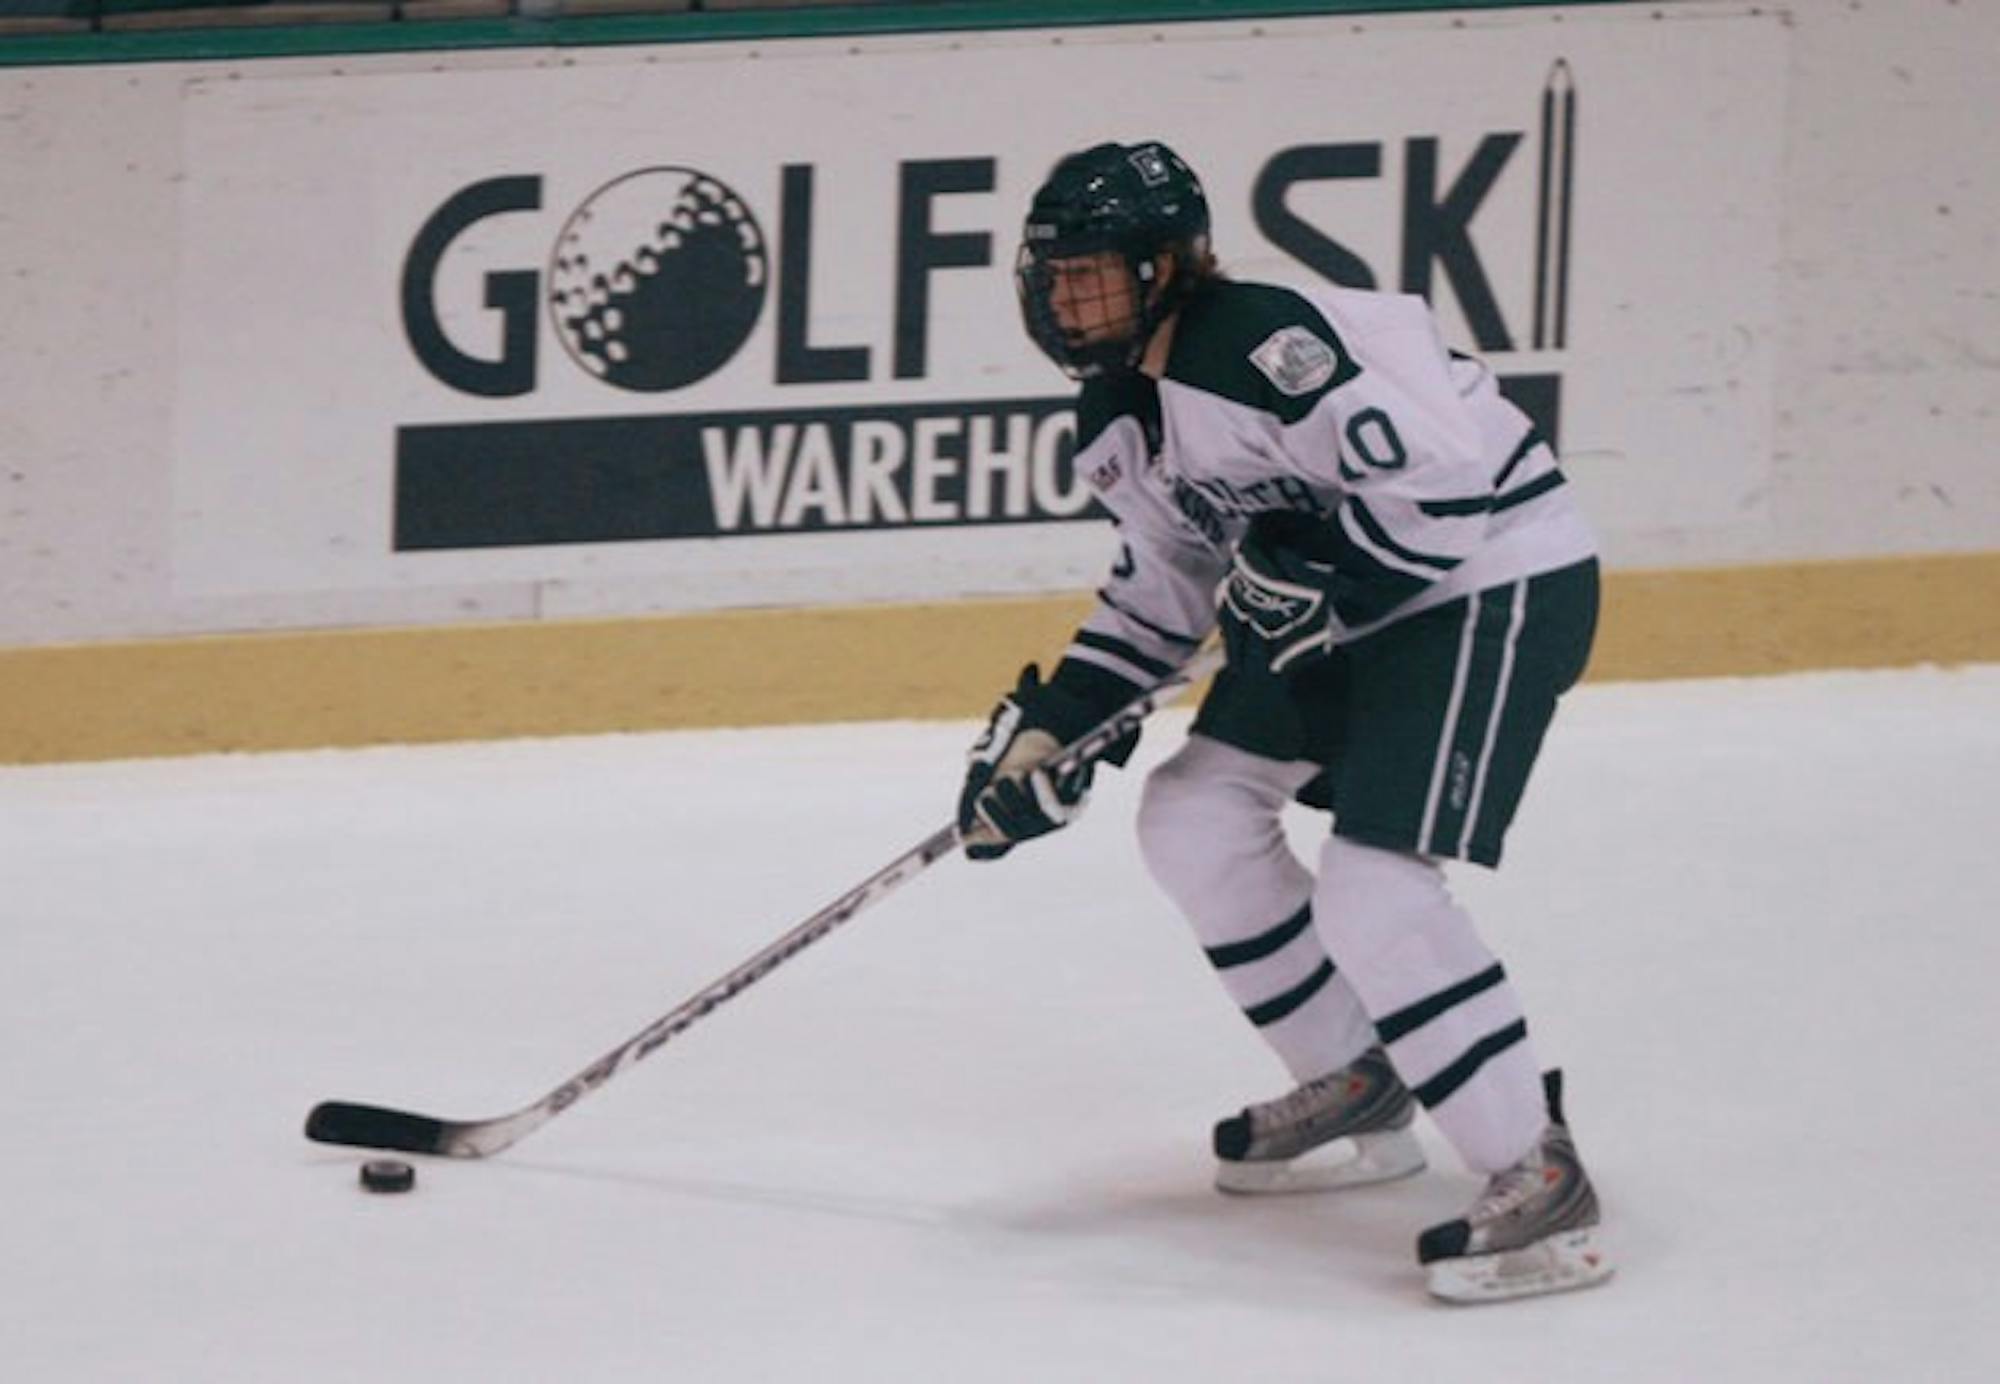 Dartmouth men's hockey was able to avoid being swept with a 3-3 tie against Colgate on Friday night.